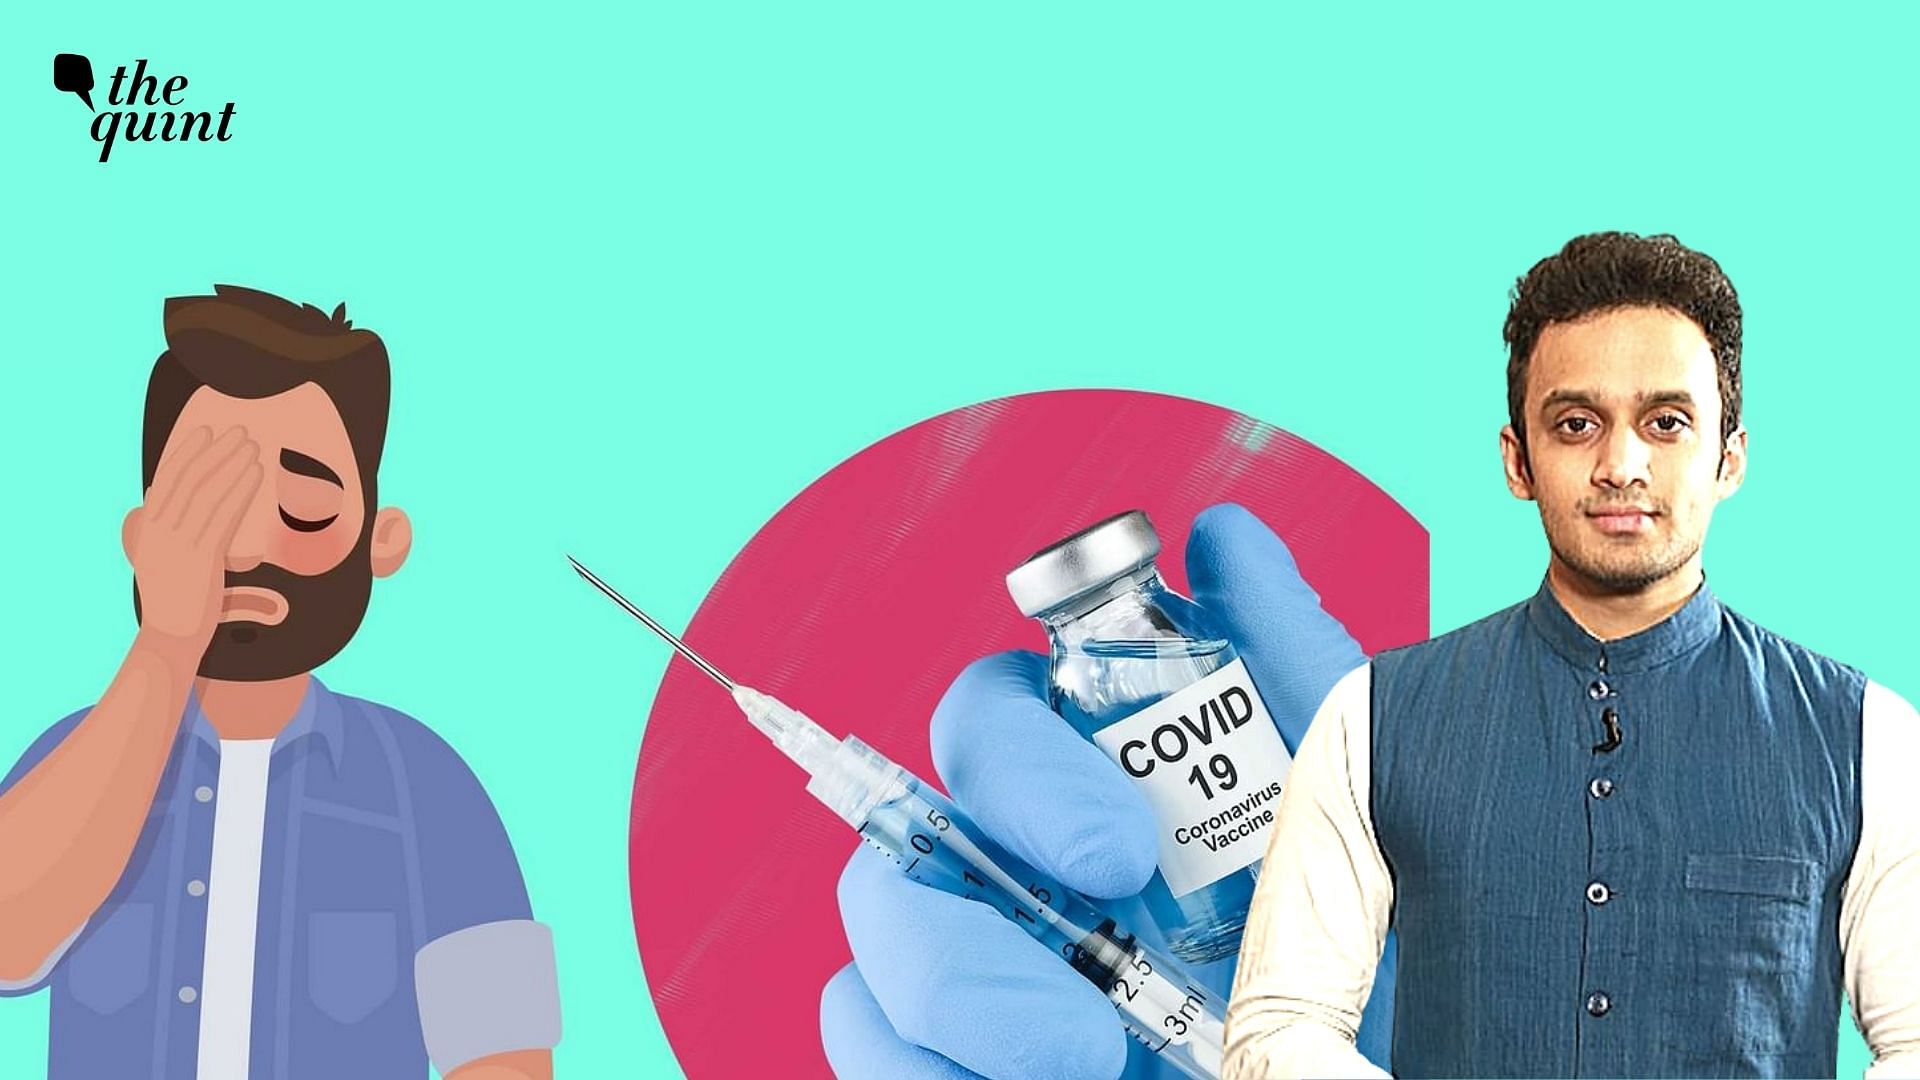 “What if the COVID-19 vaccine has side-effects?”